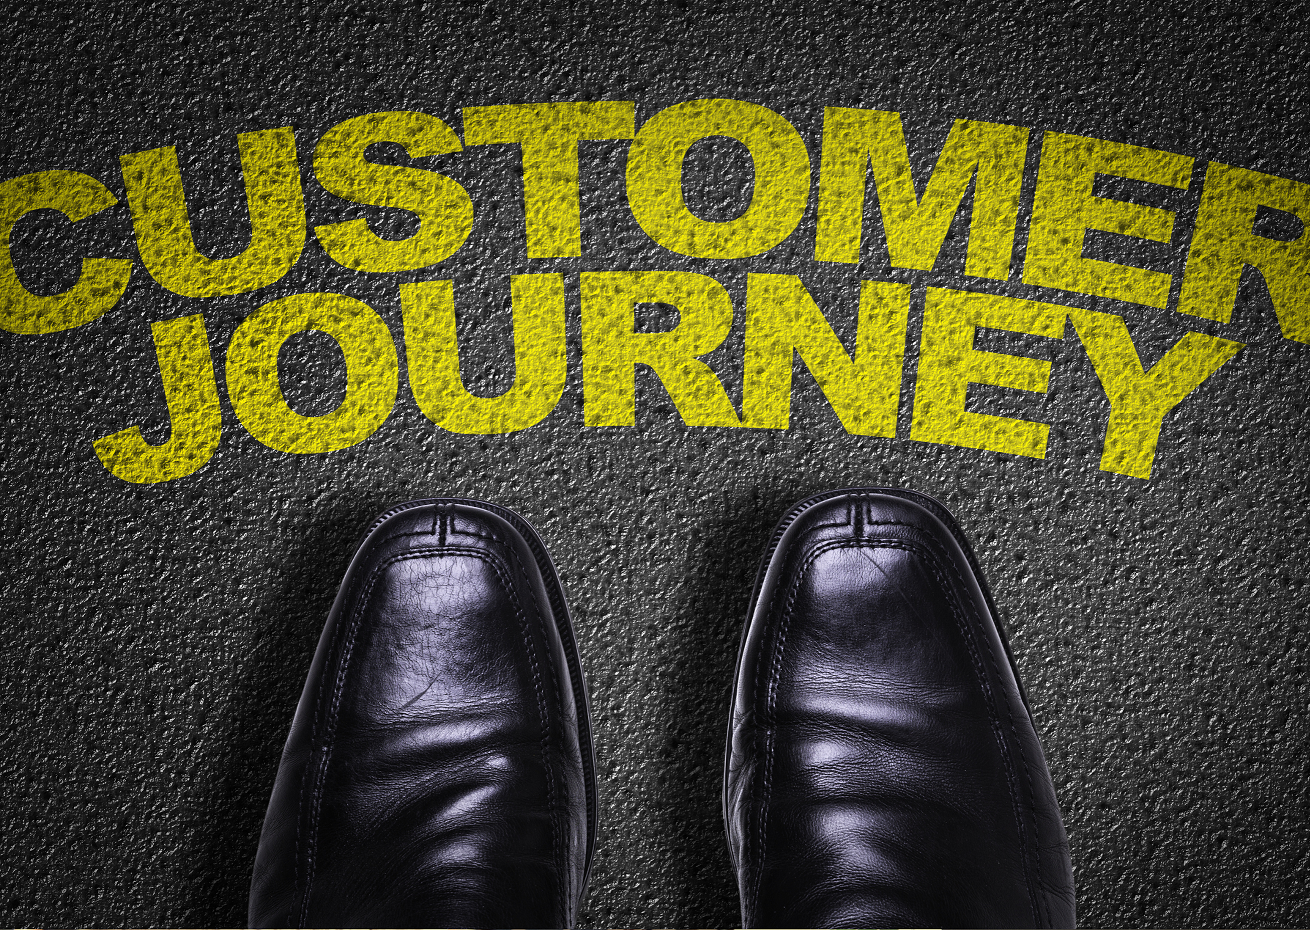 be useable think about your customer journey